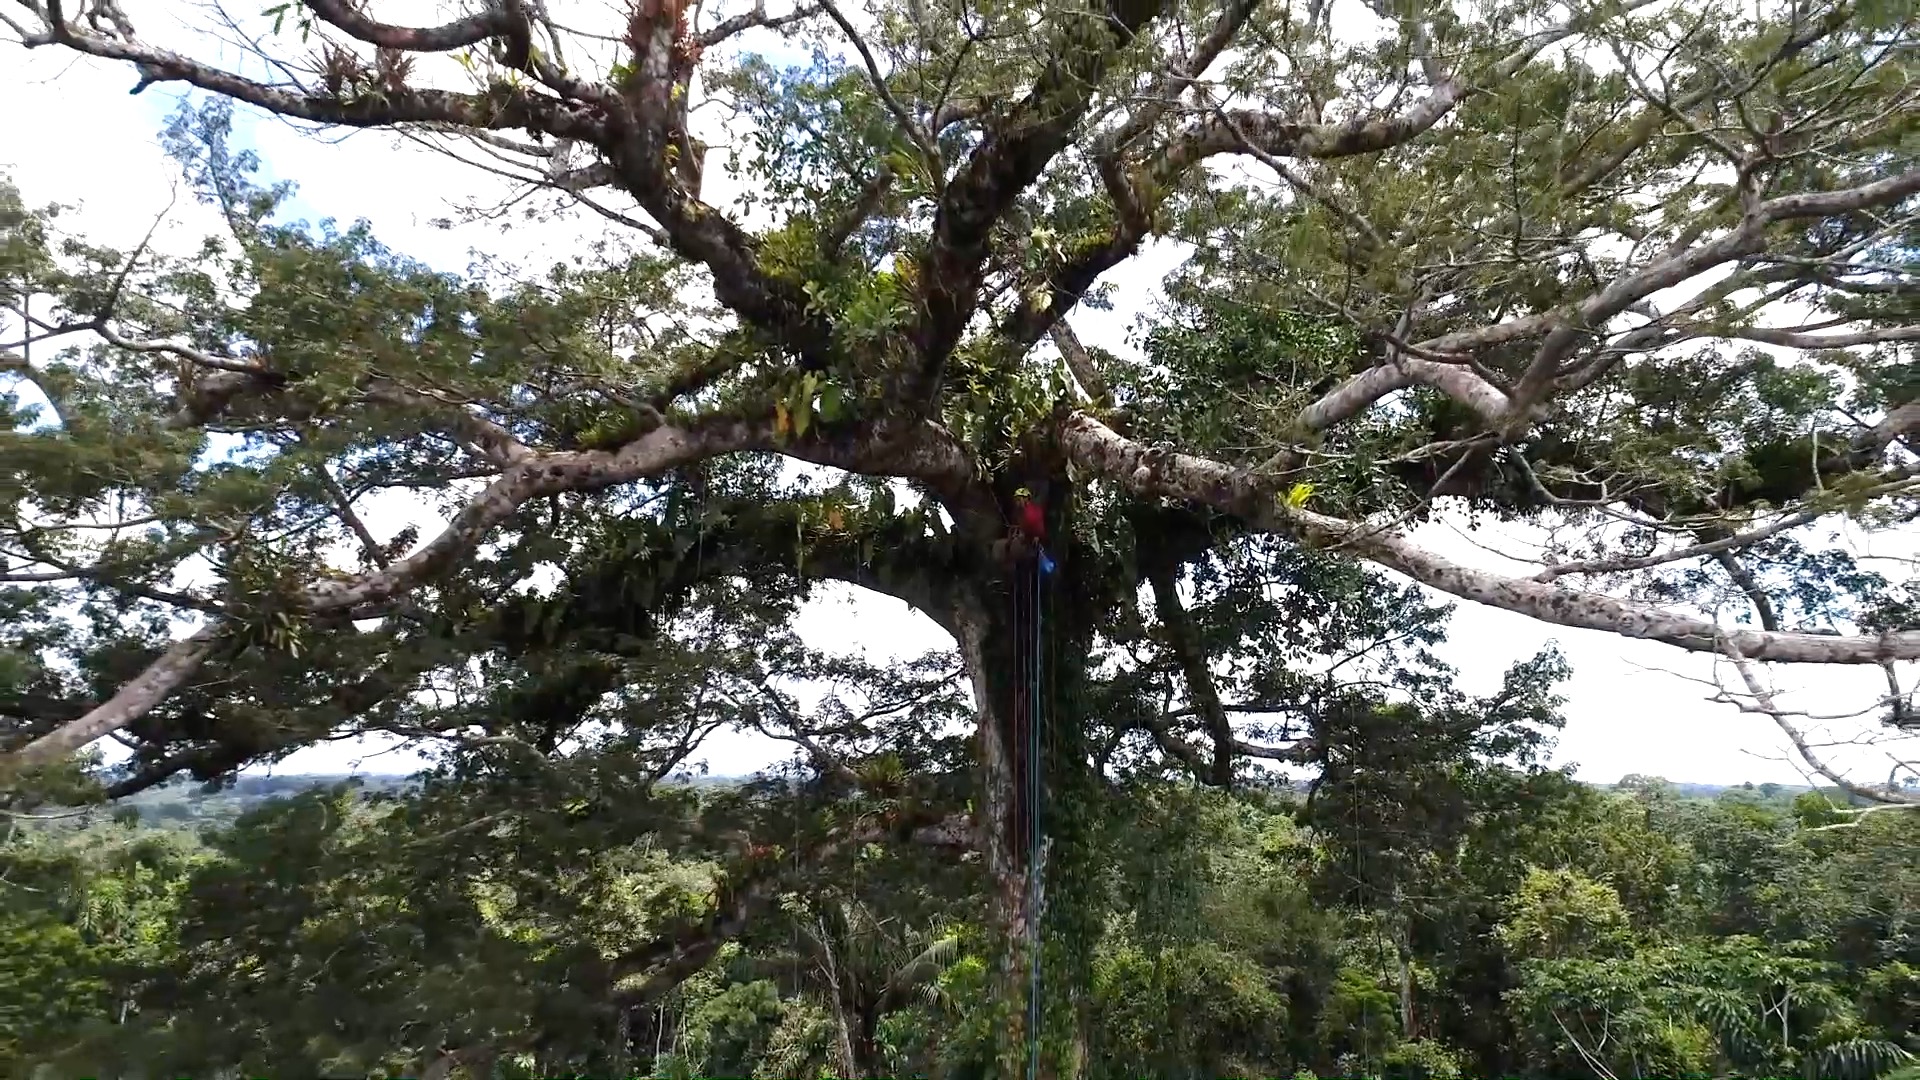 Zoomed out shot of person in climbing gear climbing a large tree in a jungle/forest